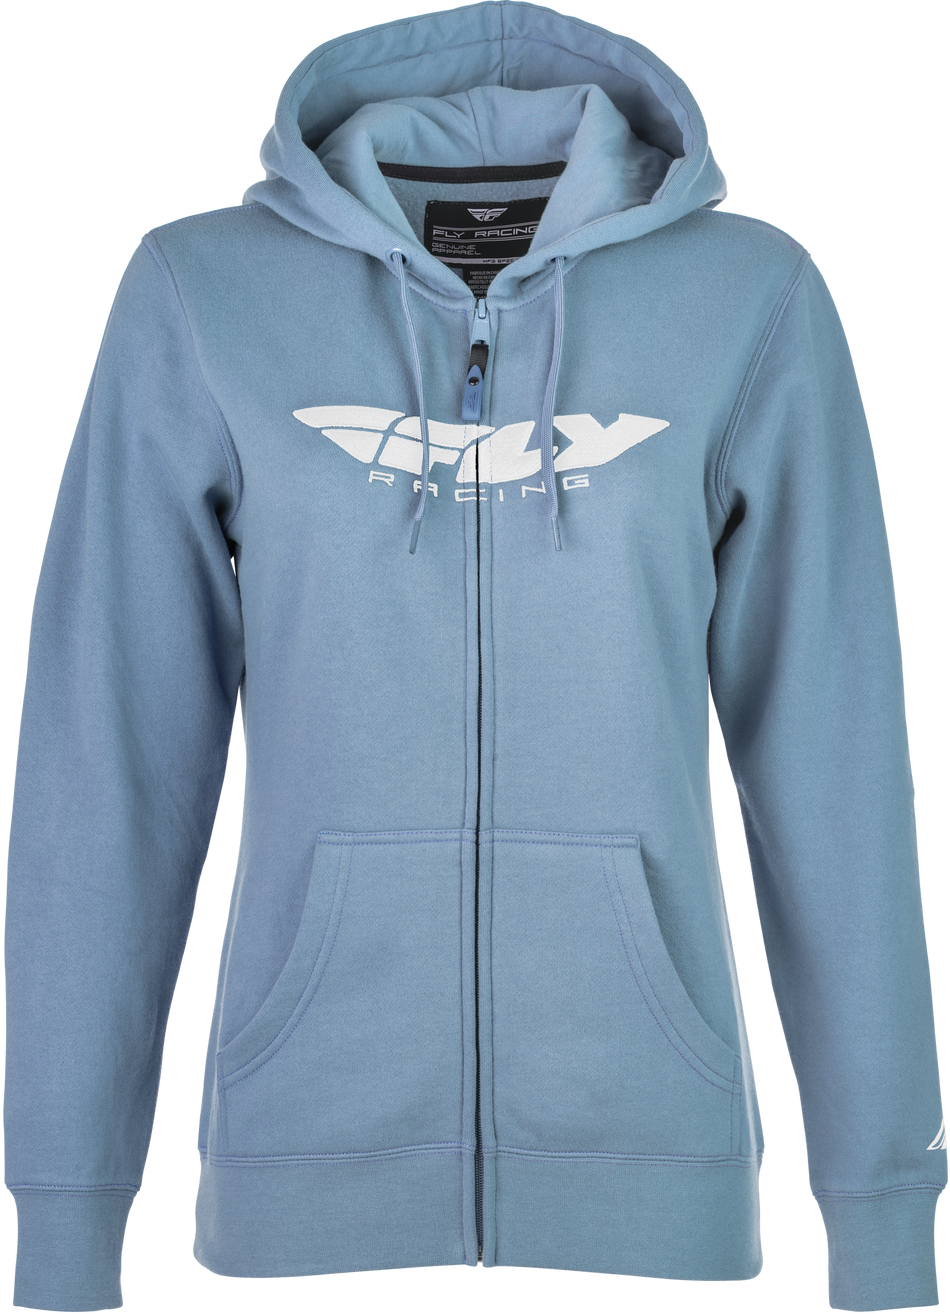 FLY RACING Women's Fly Corporate Zip Up Light Blue Lg 358-0063L